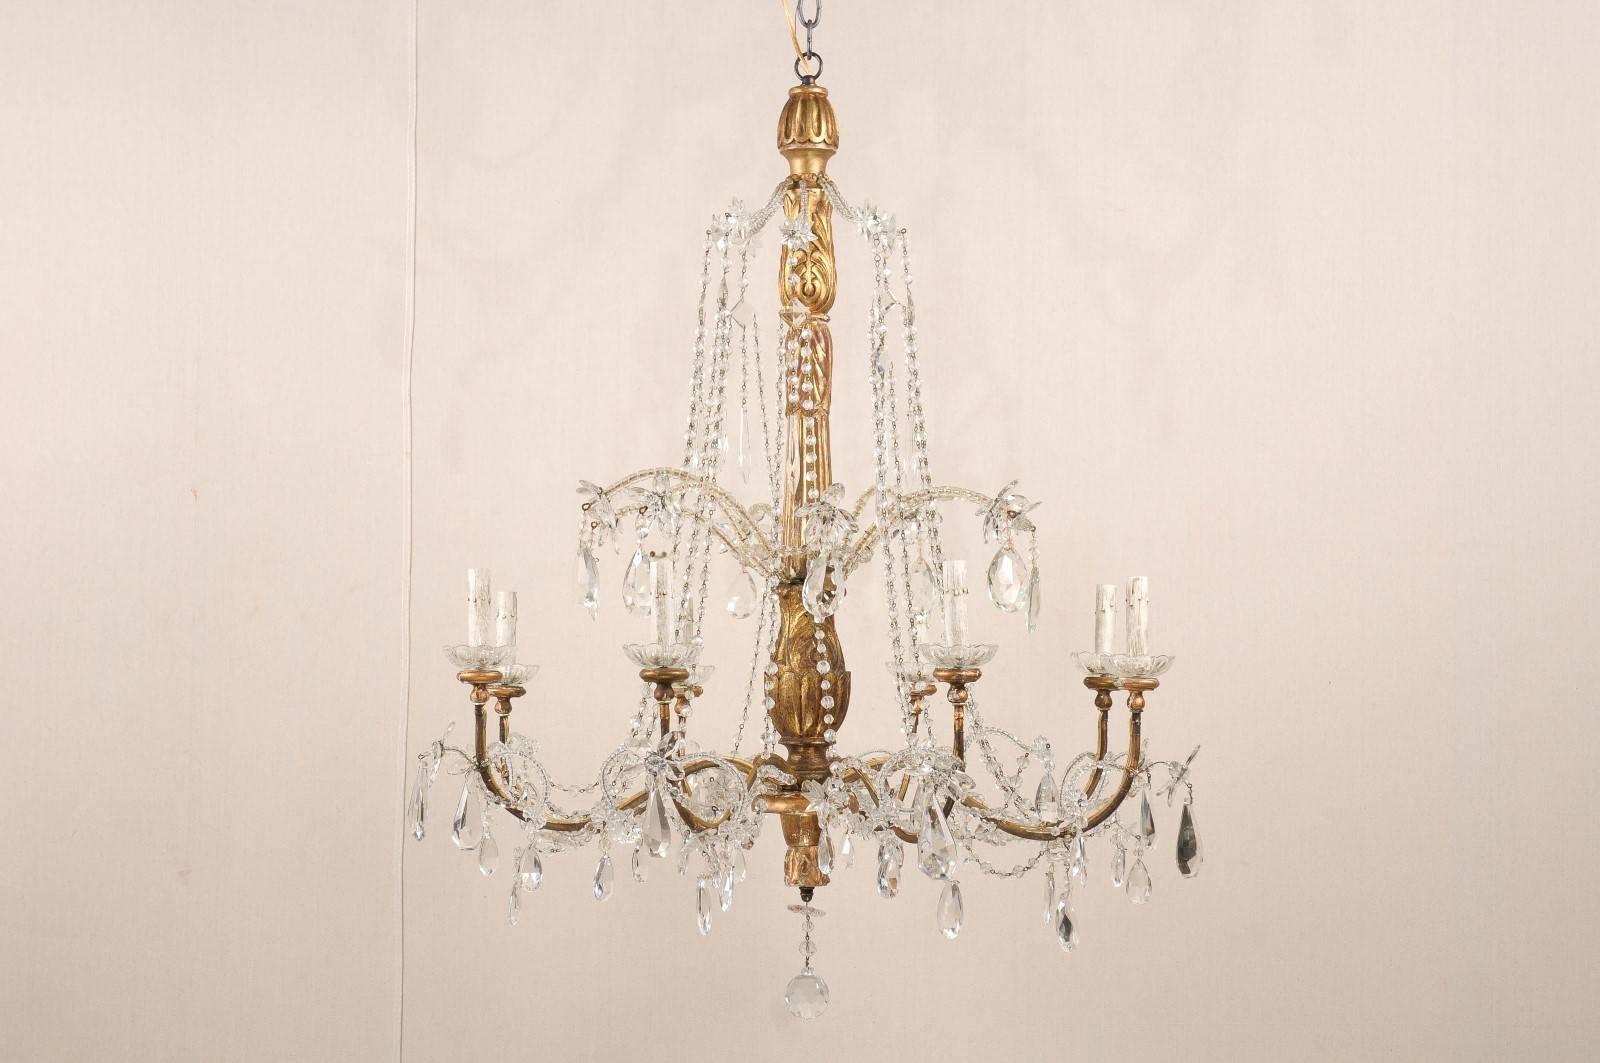 An Italian eight-light crystal chandelier with gilded wood central column from the 19th century. This Italian chandelier has eight scrolled arms stemming from a nice ornately carved central column and supporting the glass bobèches. Above the arms